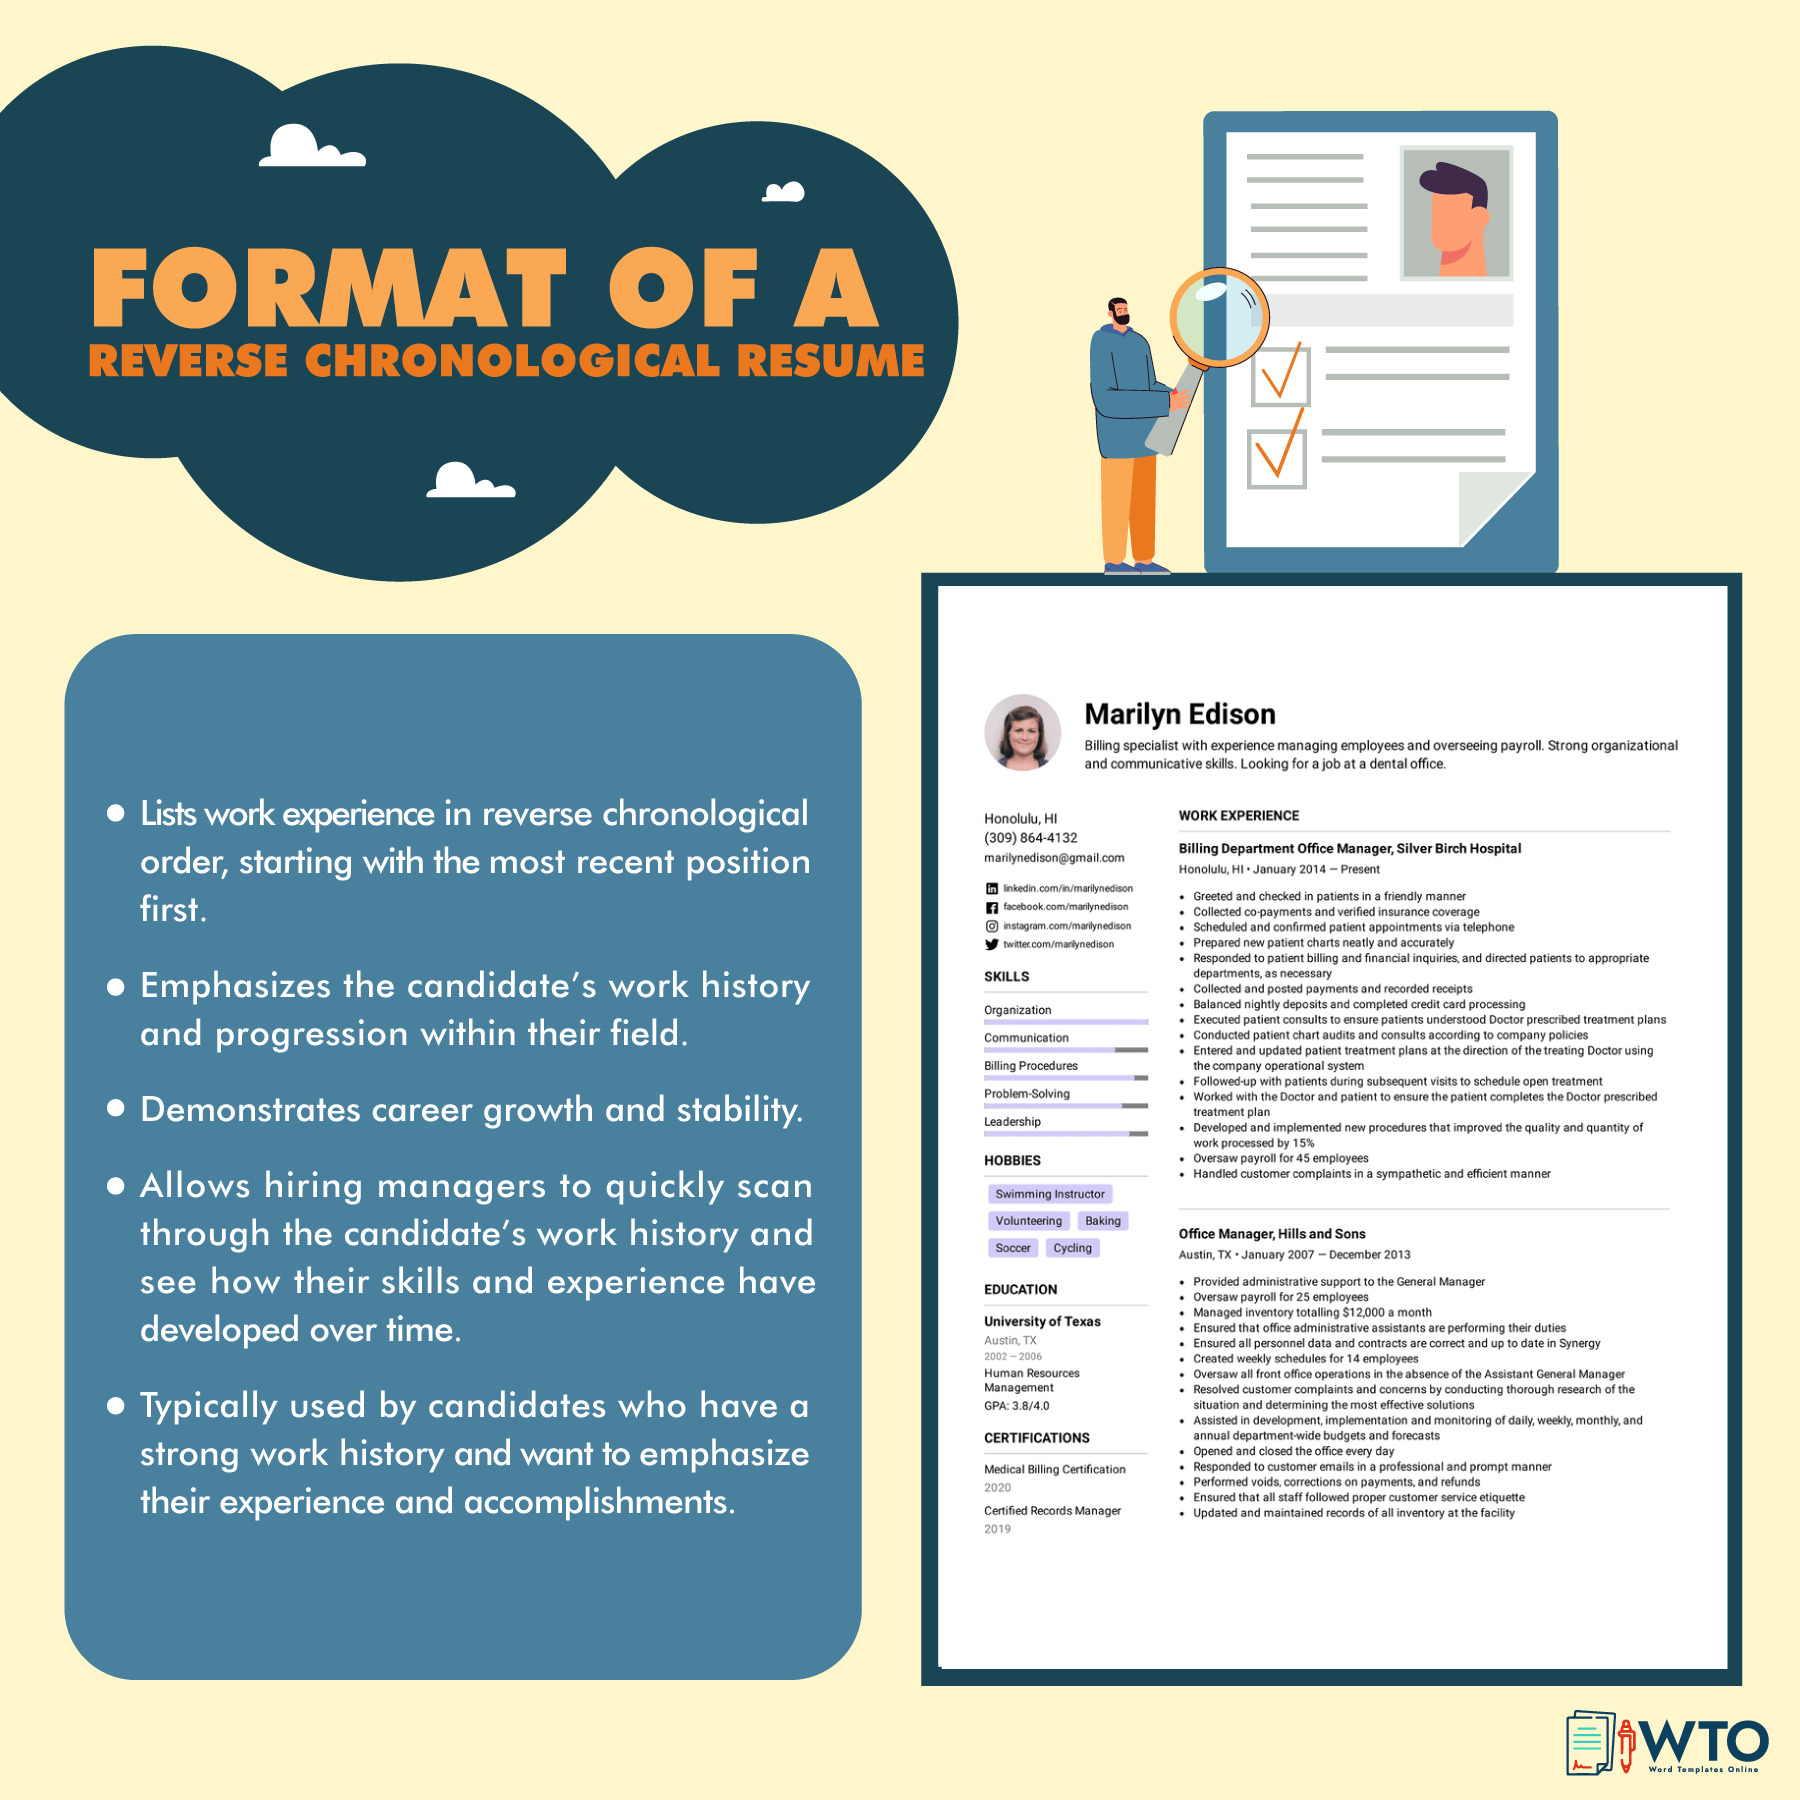 This infographic is about the format of a Reverse Chronological Resume.